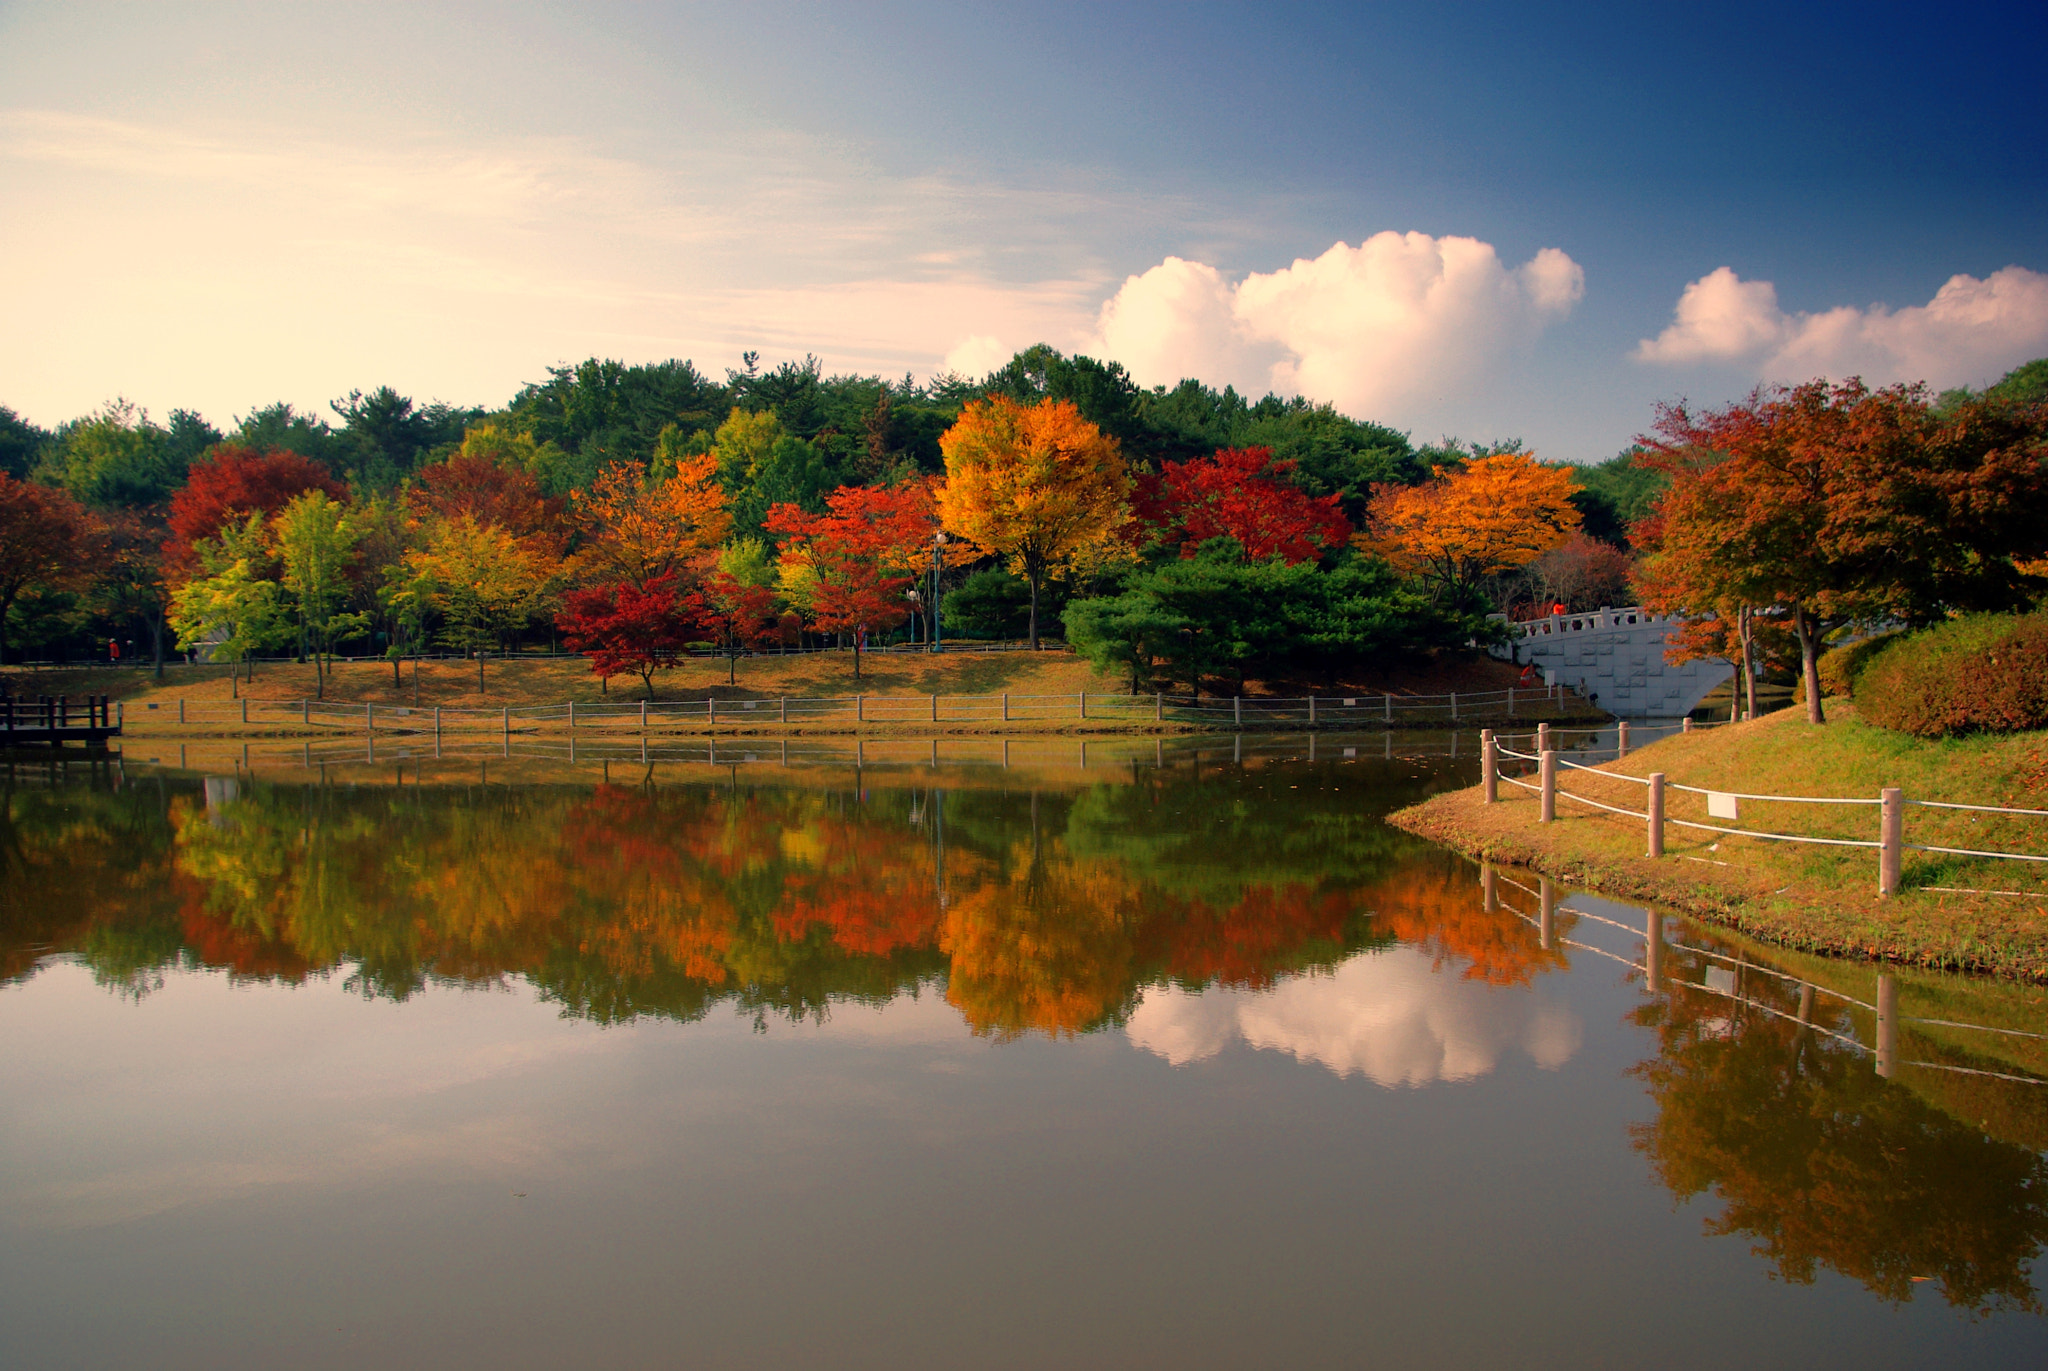 Samsung/Schneider D-XENON 18-55mm F3.5-5.6 sample photo. Fall in a lake photography